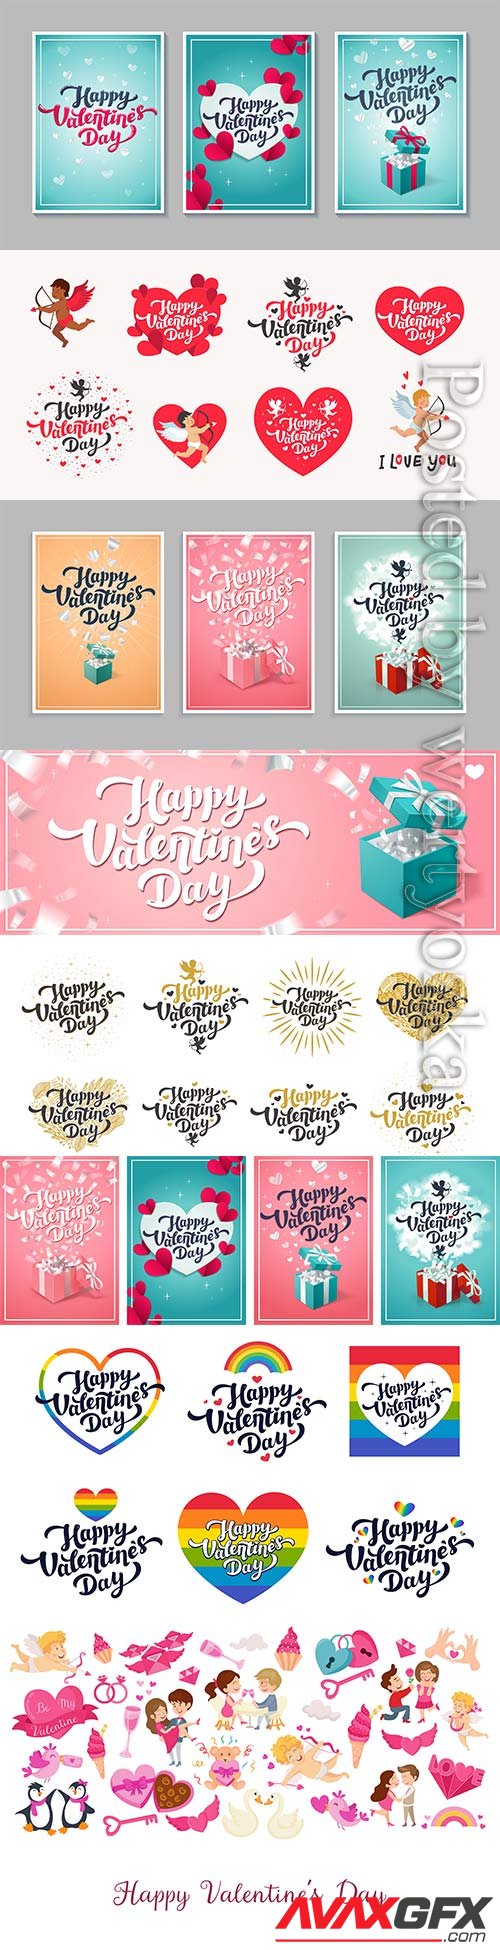 Valentine's day greeting cards, love day cards or stickers